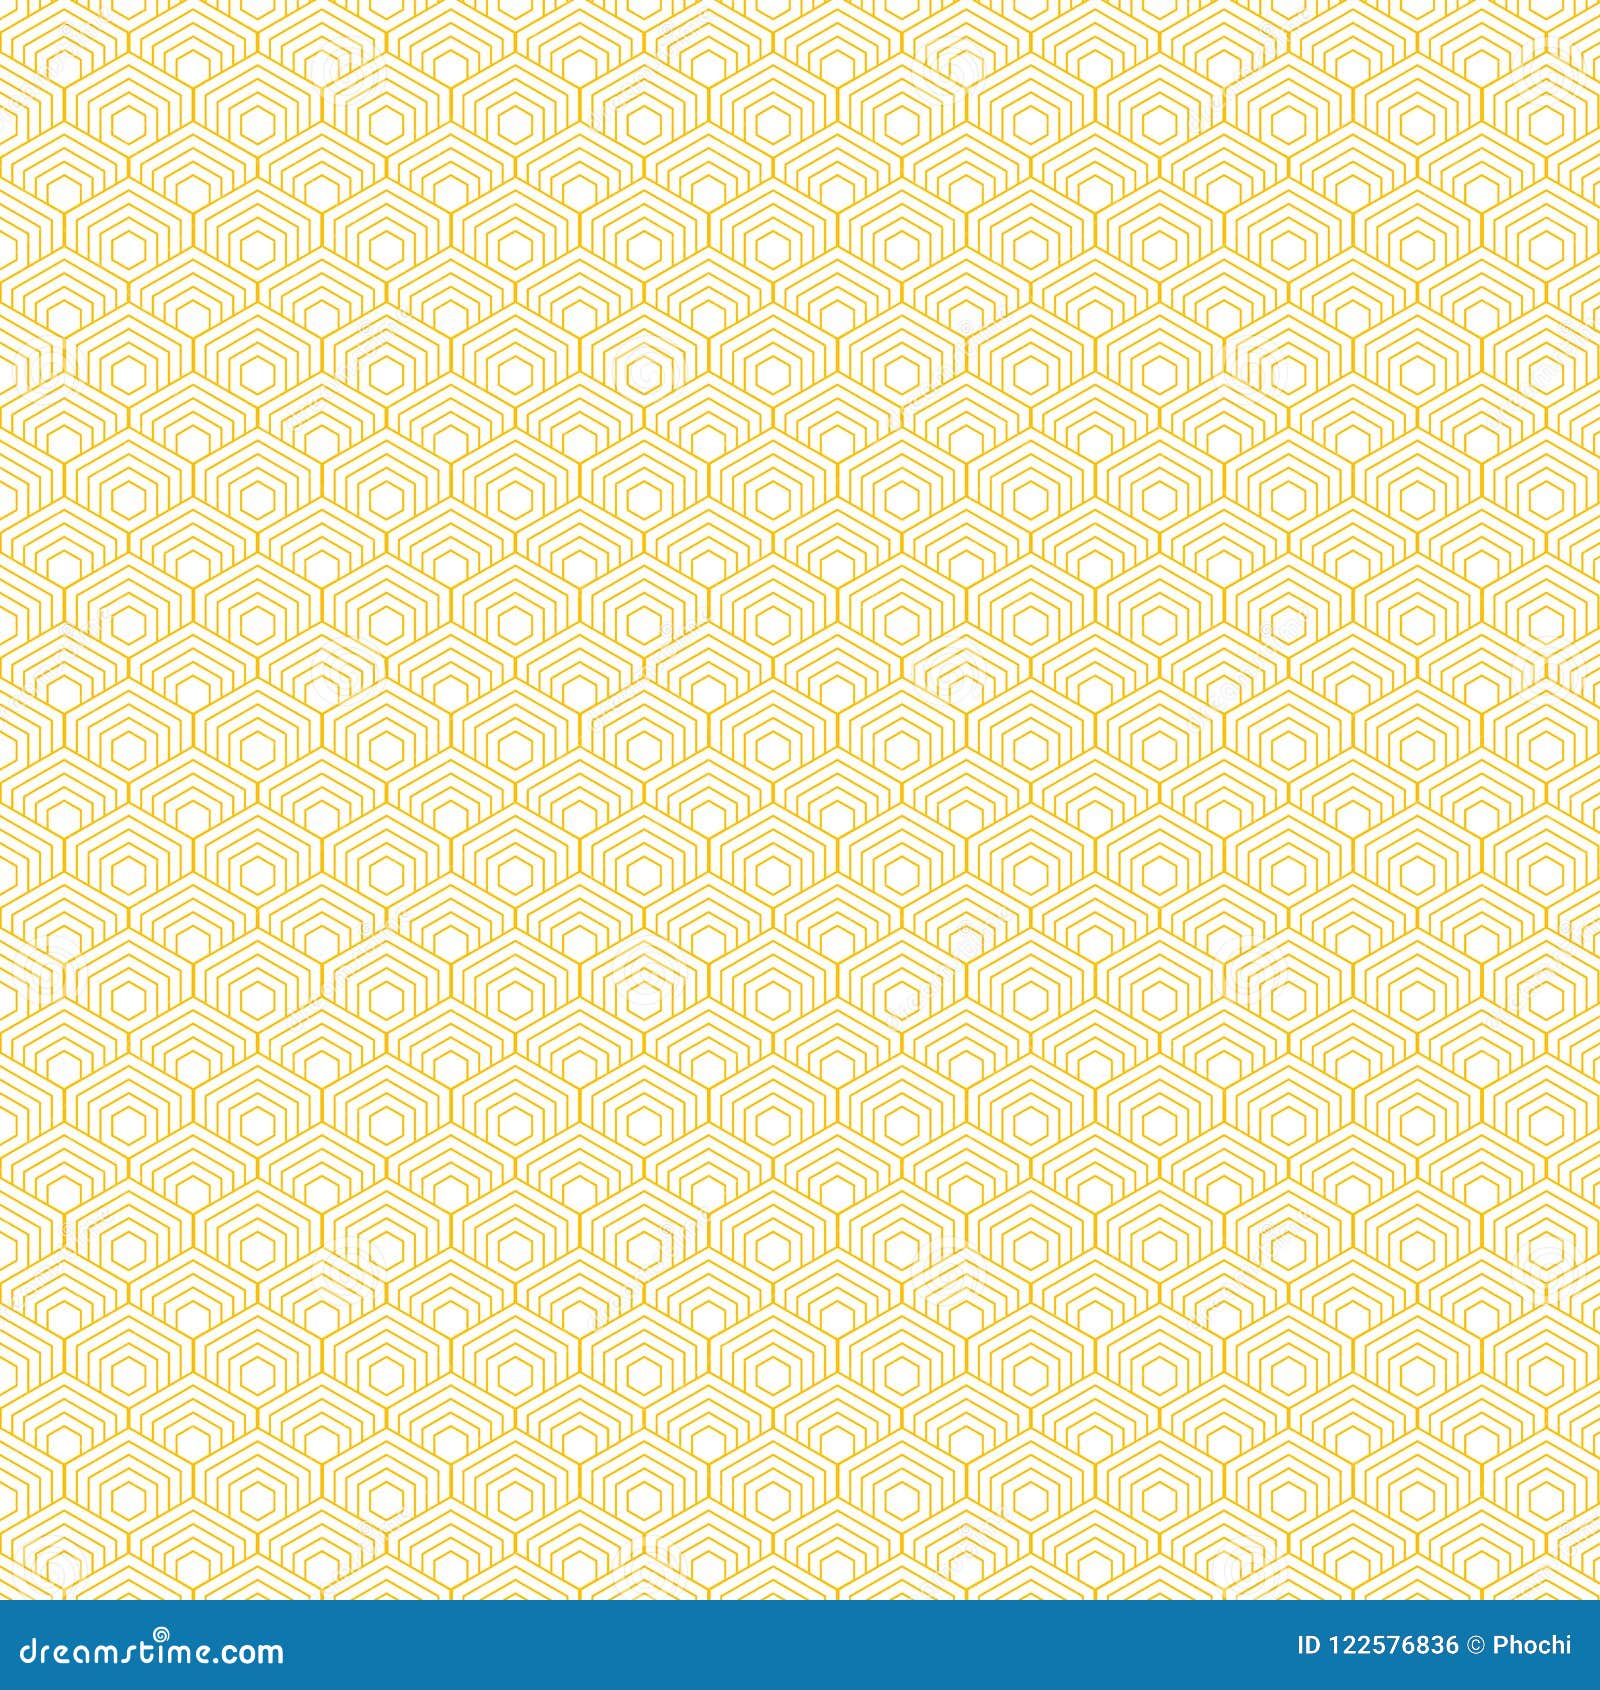 Download Abstract Yellow Hexagon Border Pattern Background. Stock ...